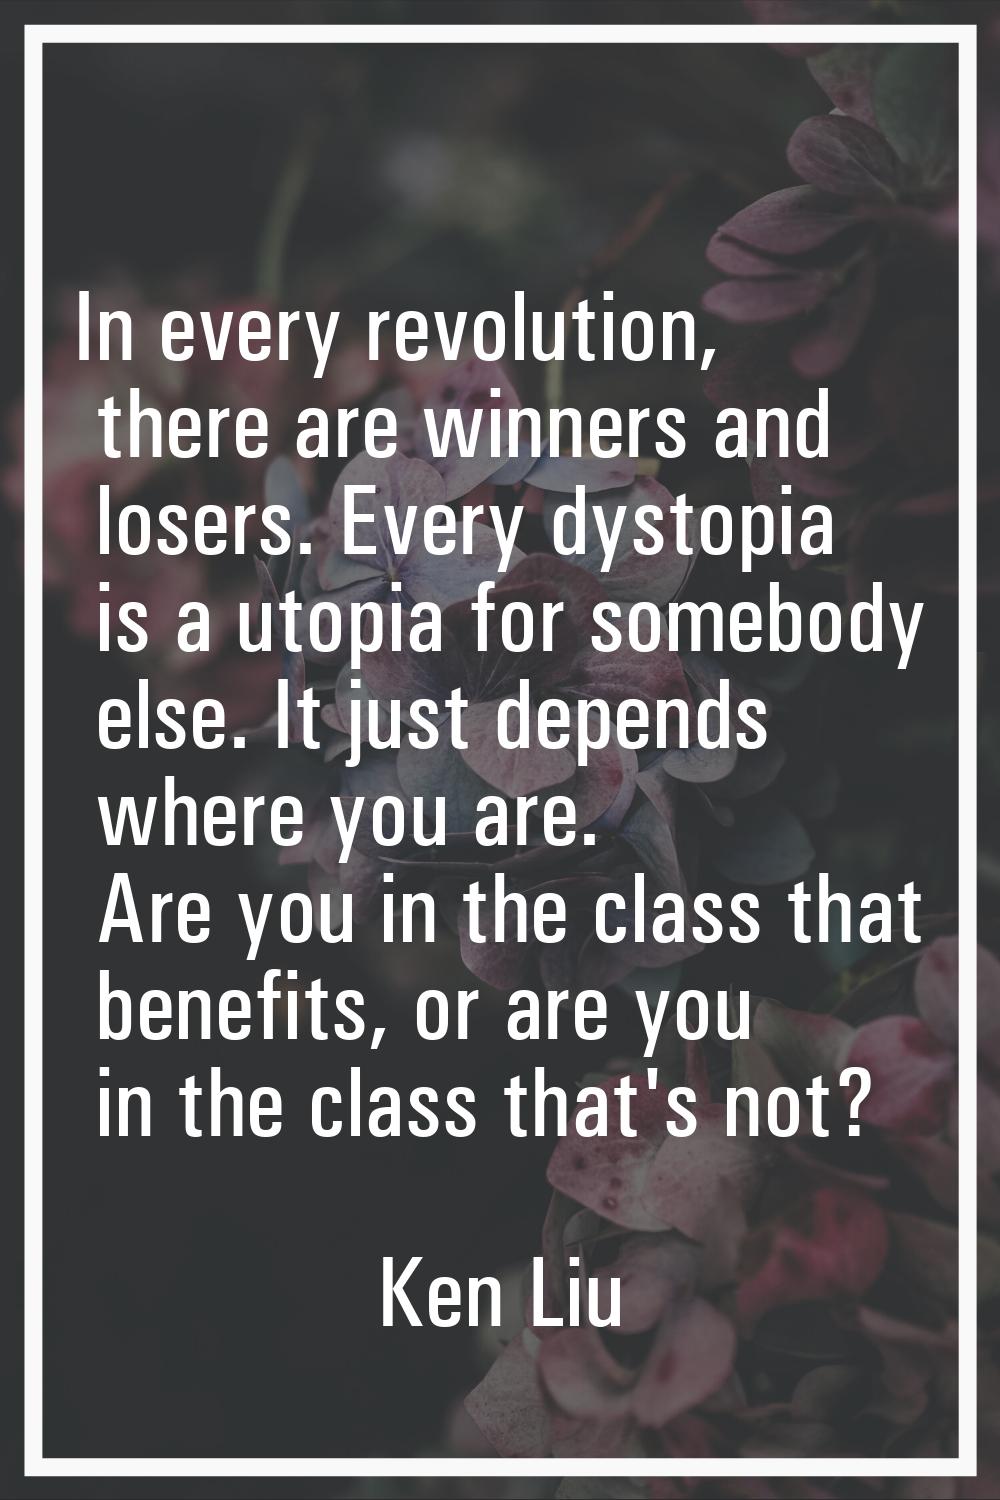 In every revolution, there are winners and losers. Every dystopia is a utopia for somebody else. It